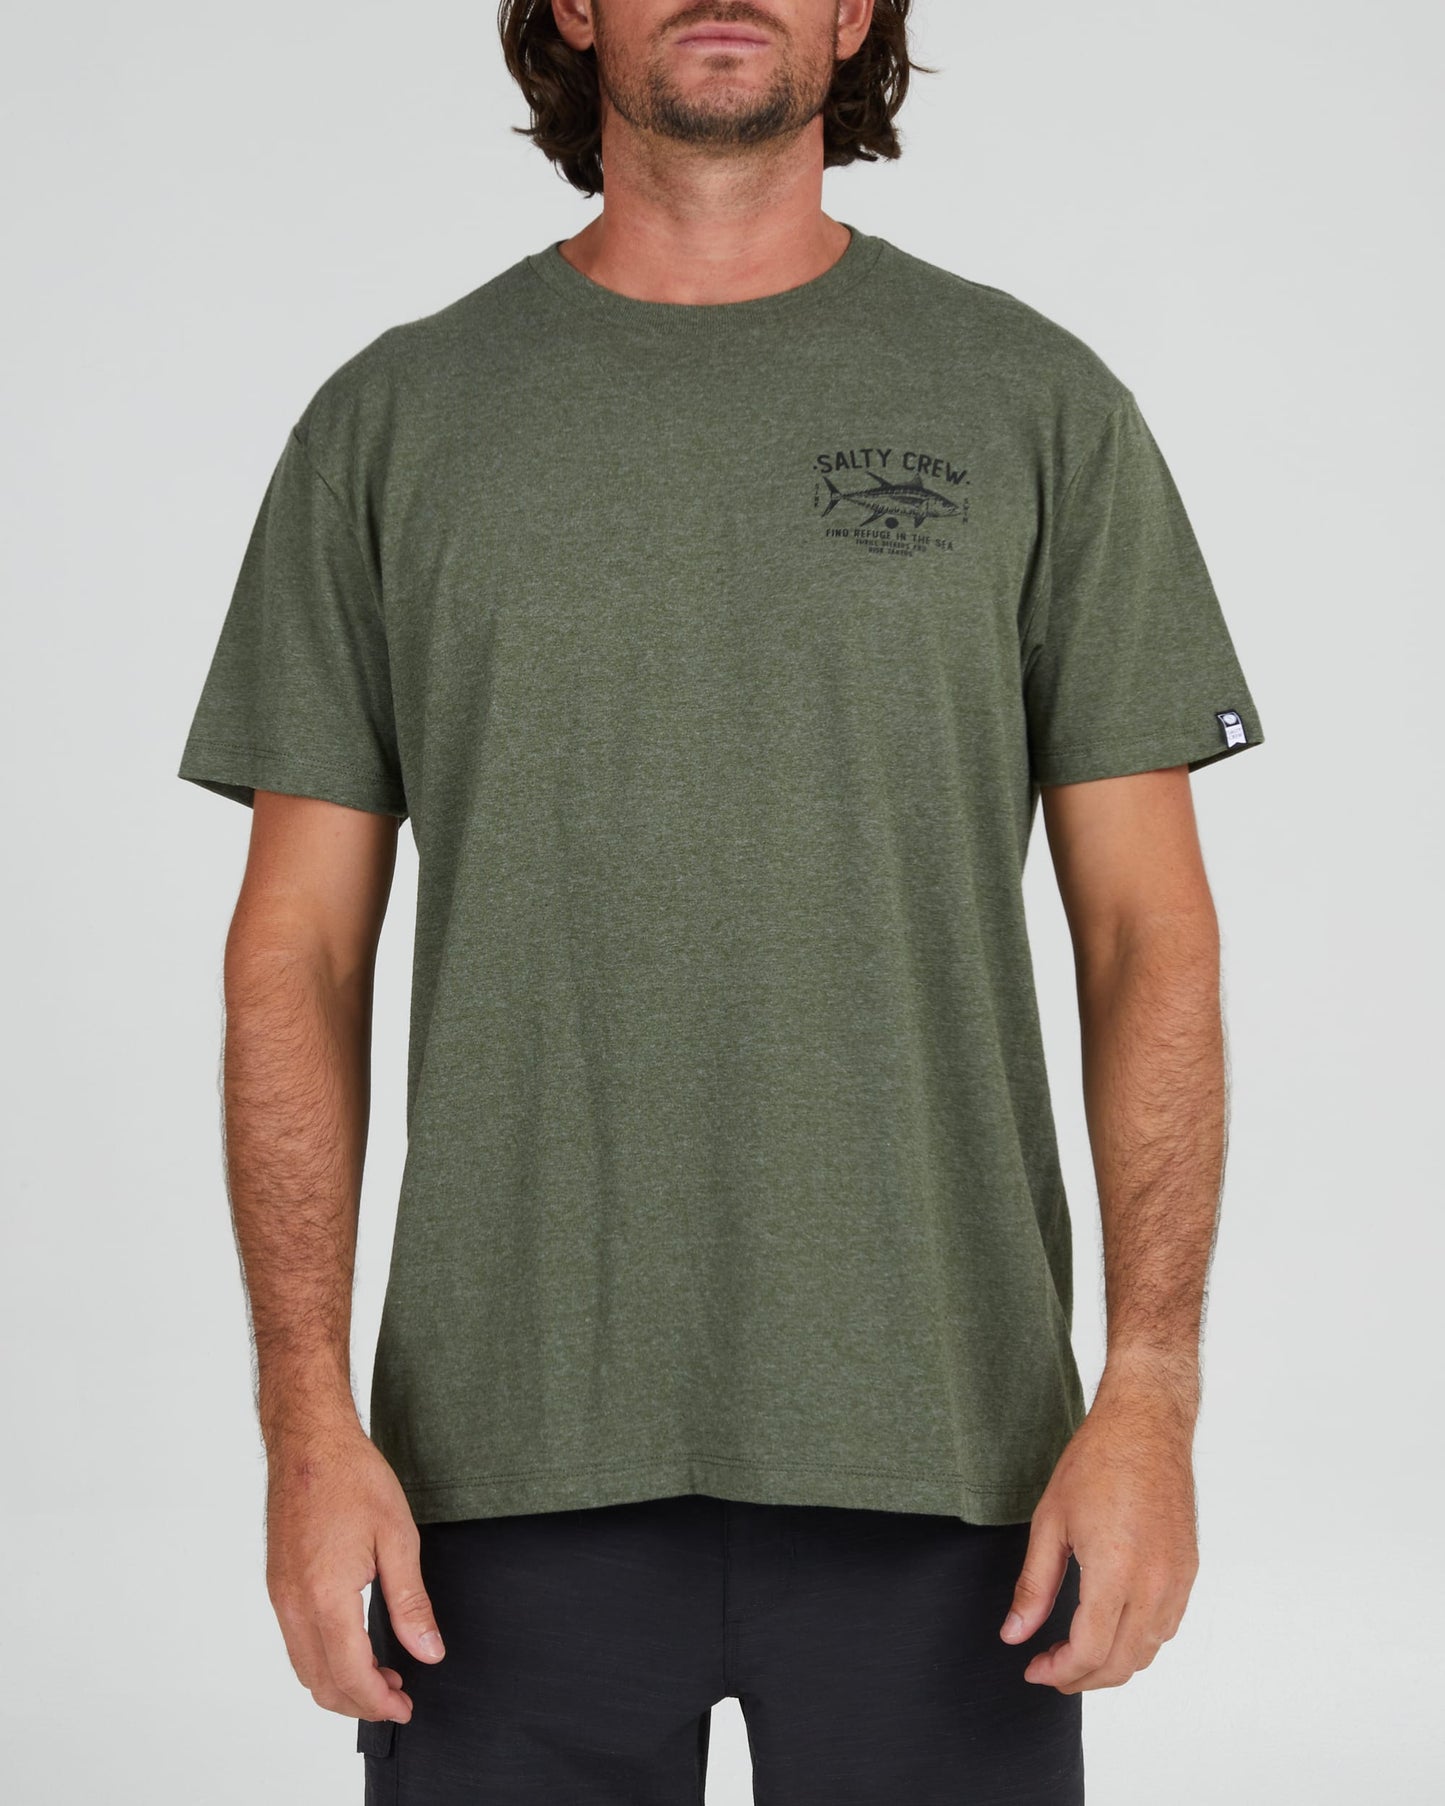 Salty crew T-SHIRTS S/S MARKET STANDARD S/S TEE - Forest Heather in Forest Heather